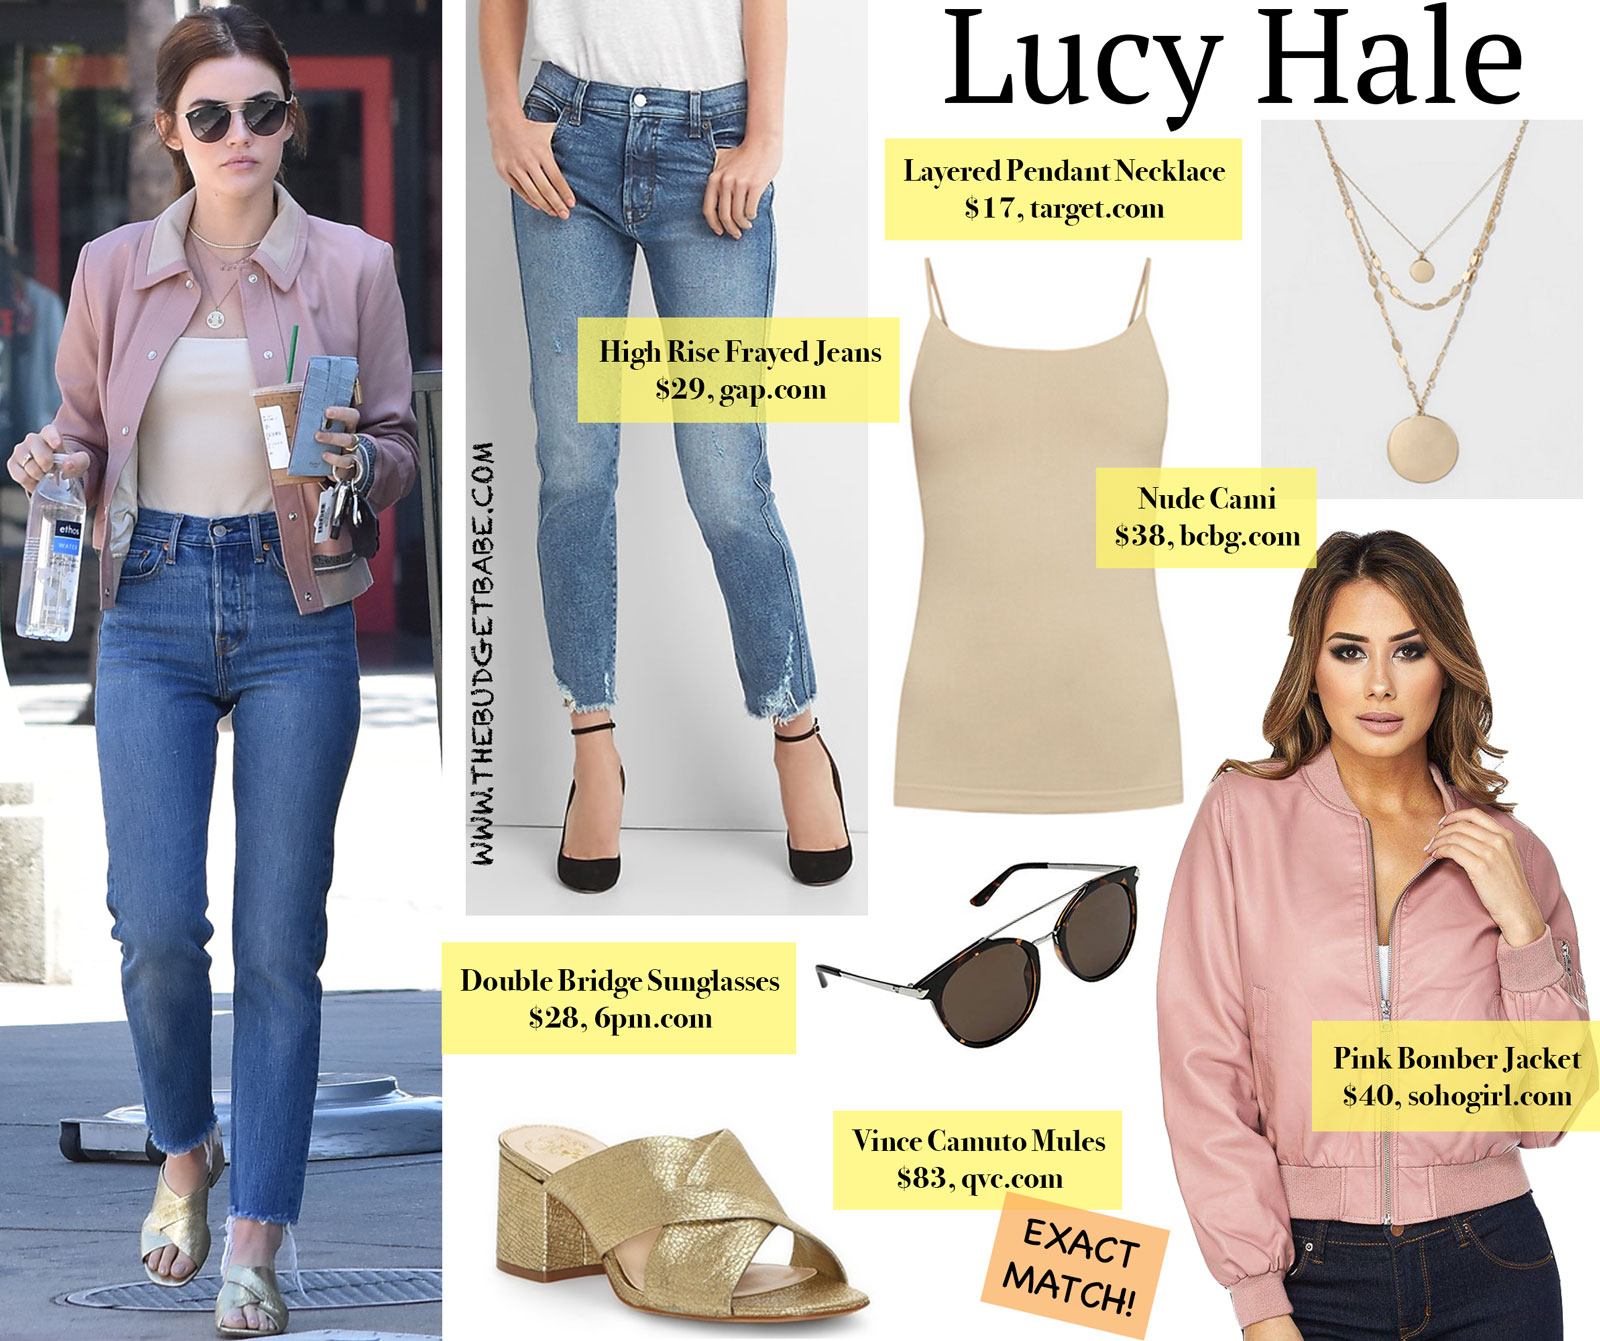 Lucy Hale Pink Bomber Jacket and Ray-Ban Look for Less